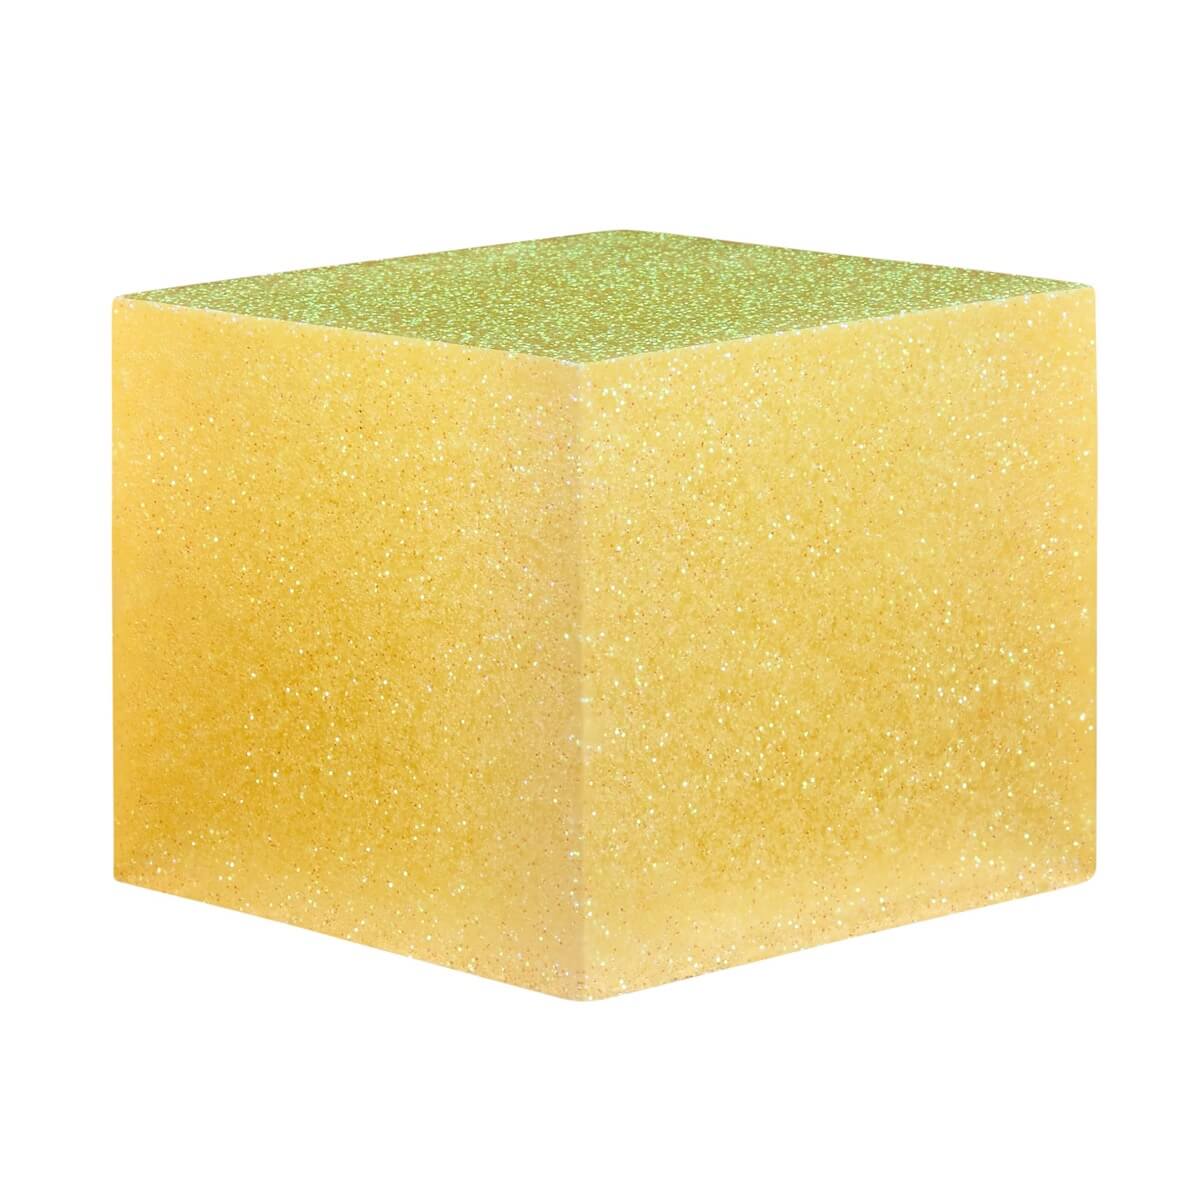 A resin cube made with the Yellow Glitter Mica Powder Pigment by Pigmently.